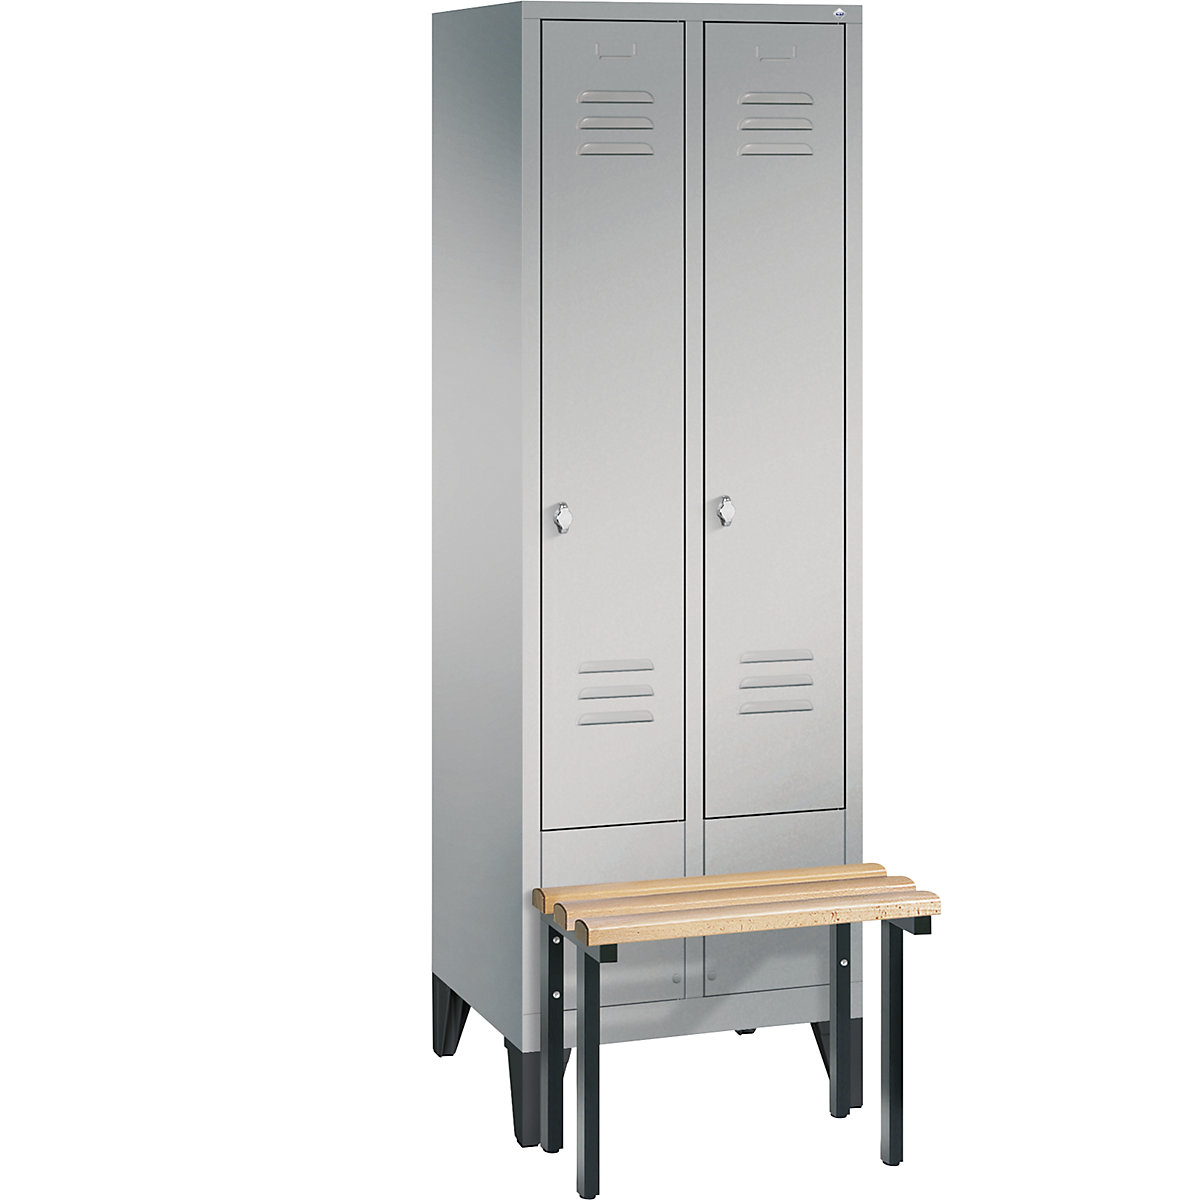 CLASSIC cloakroom locker with bench mounted in front – C+P, 2 compartments, compartment width 300 mm, white aluminium-10